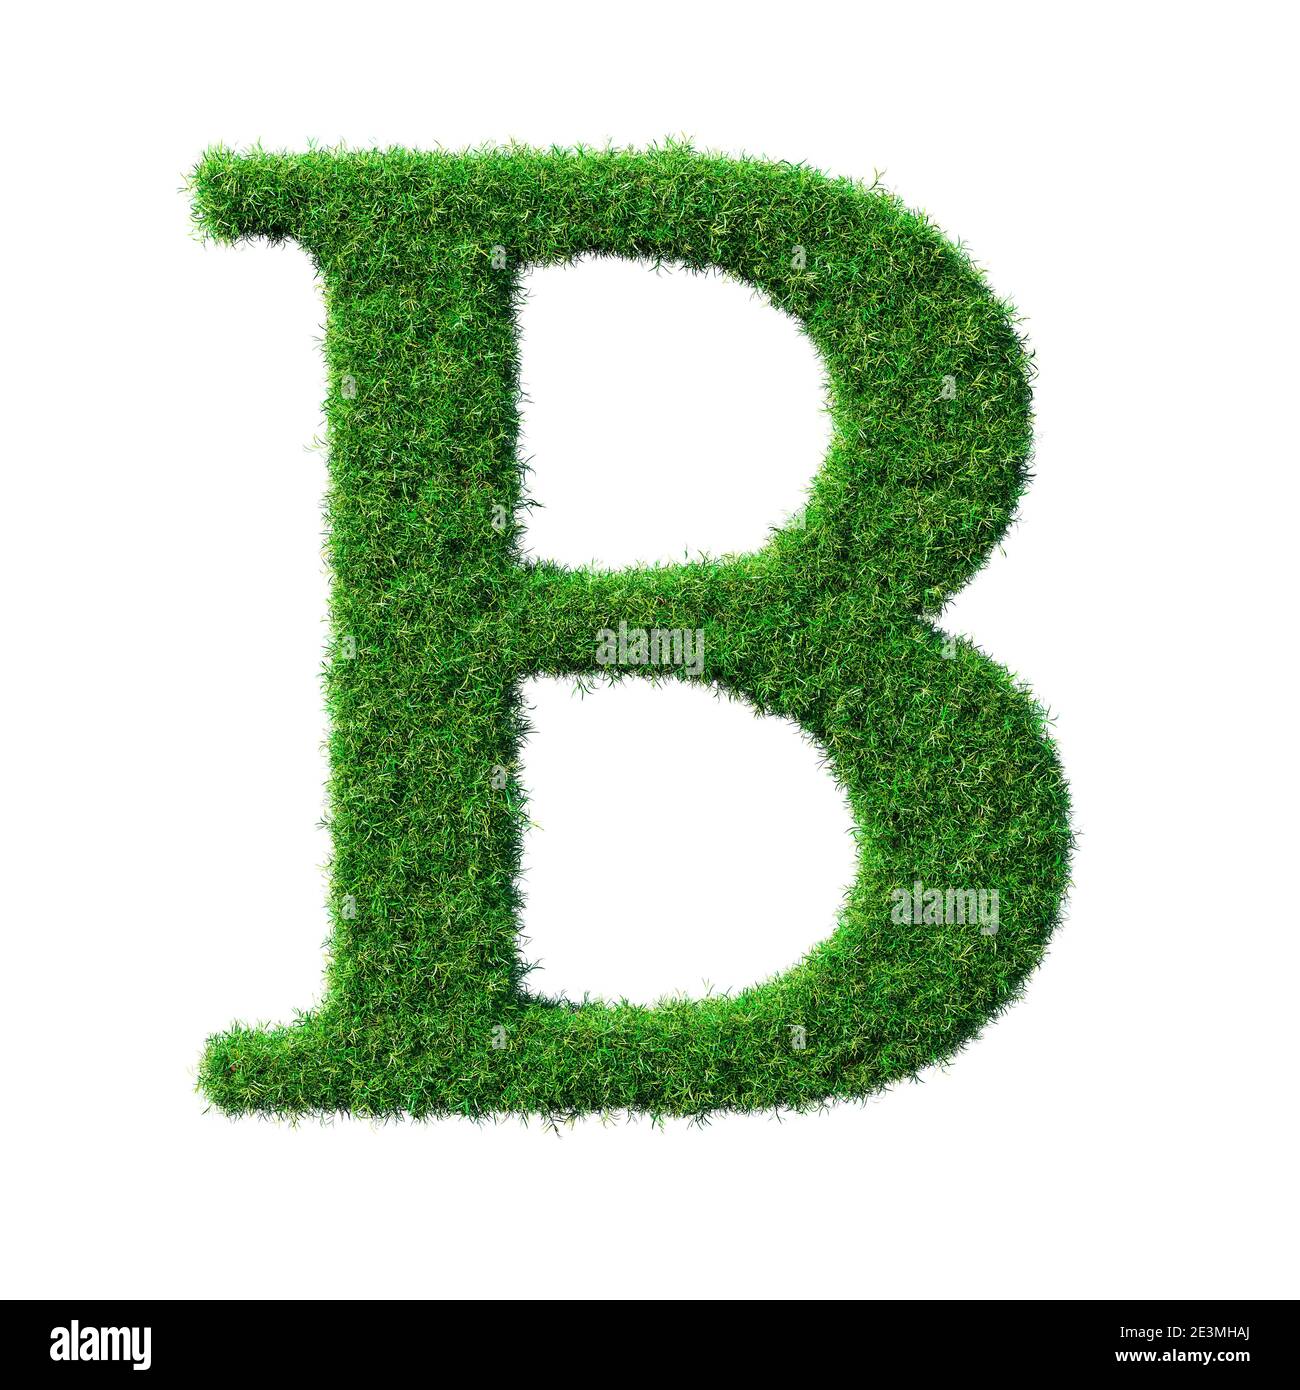 Letter B made of green grass isolated on white Background 3D-Illustration - Part of a series Stock Photo